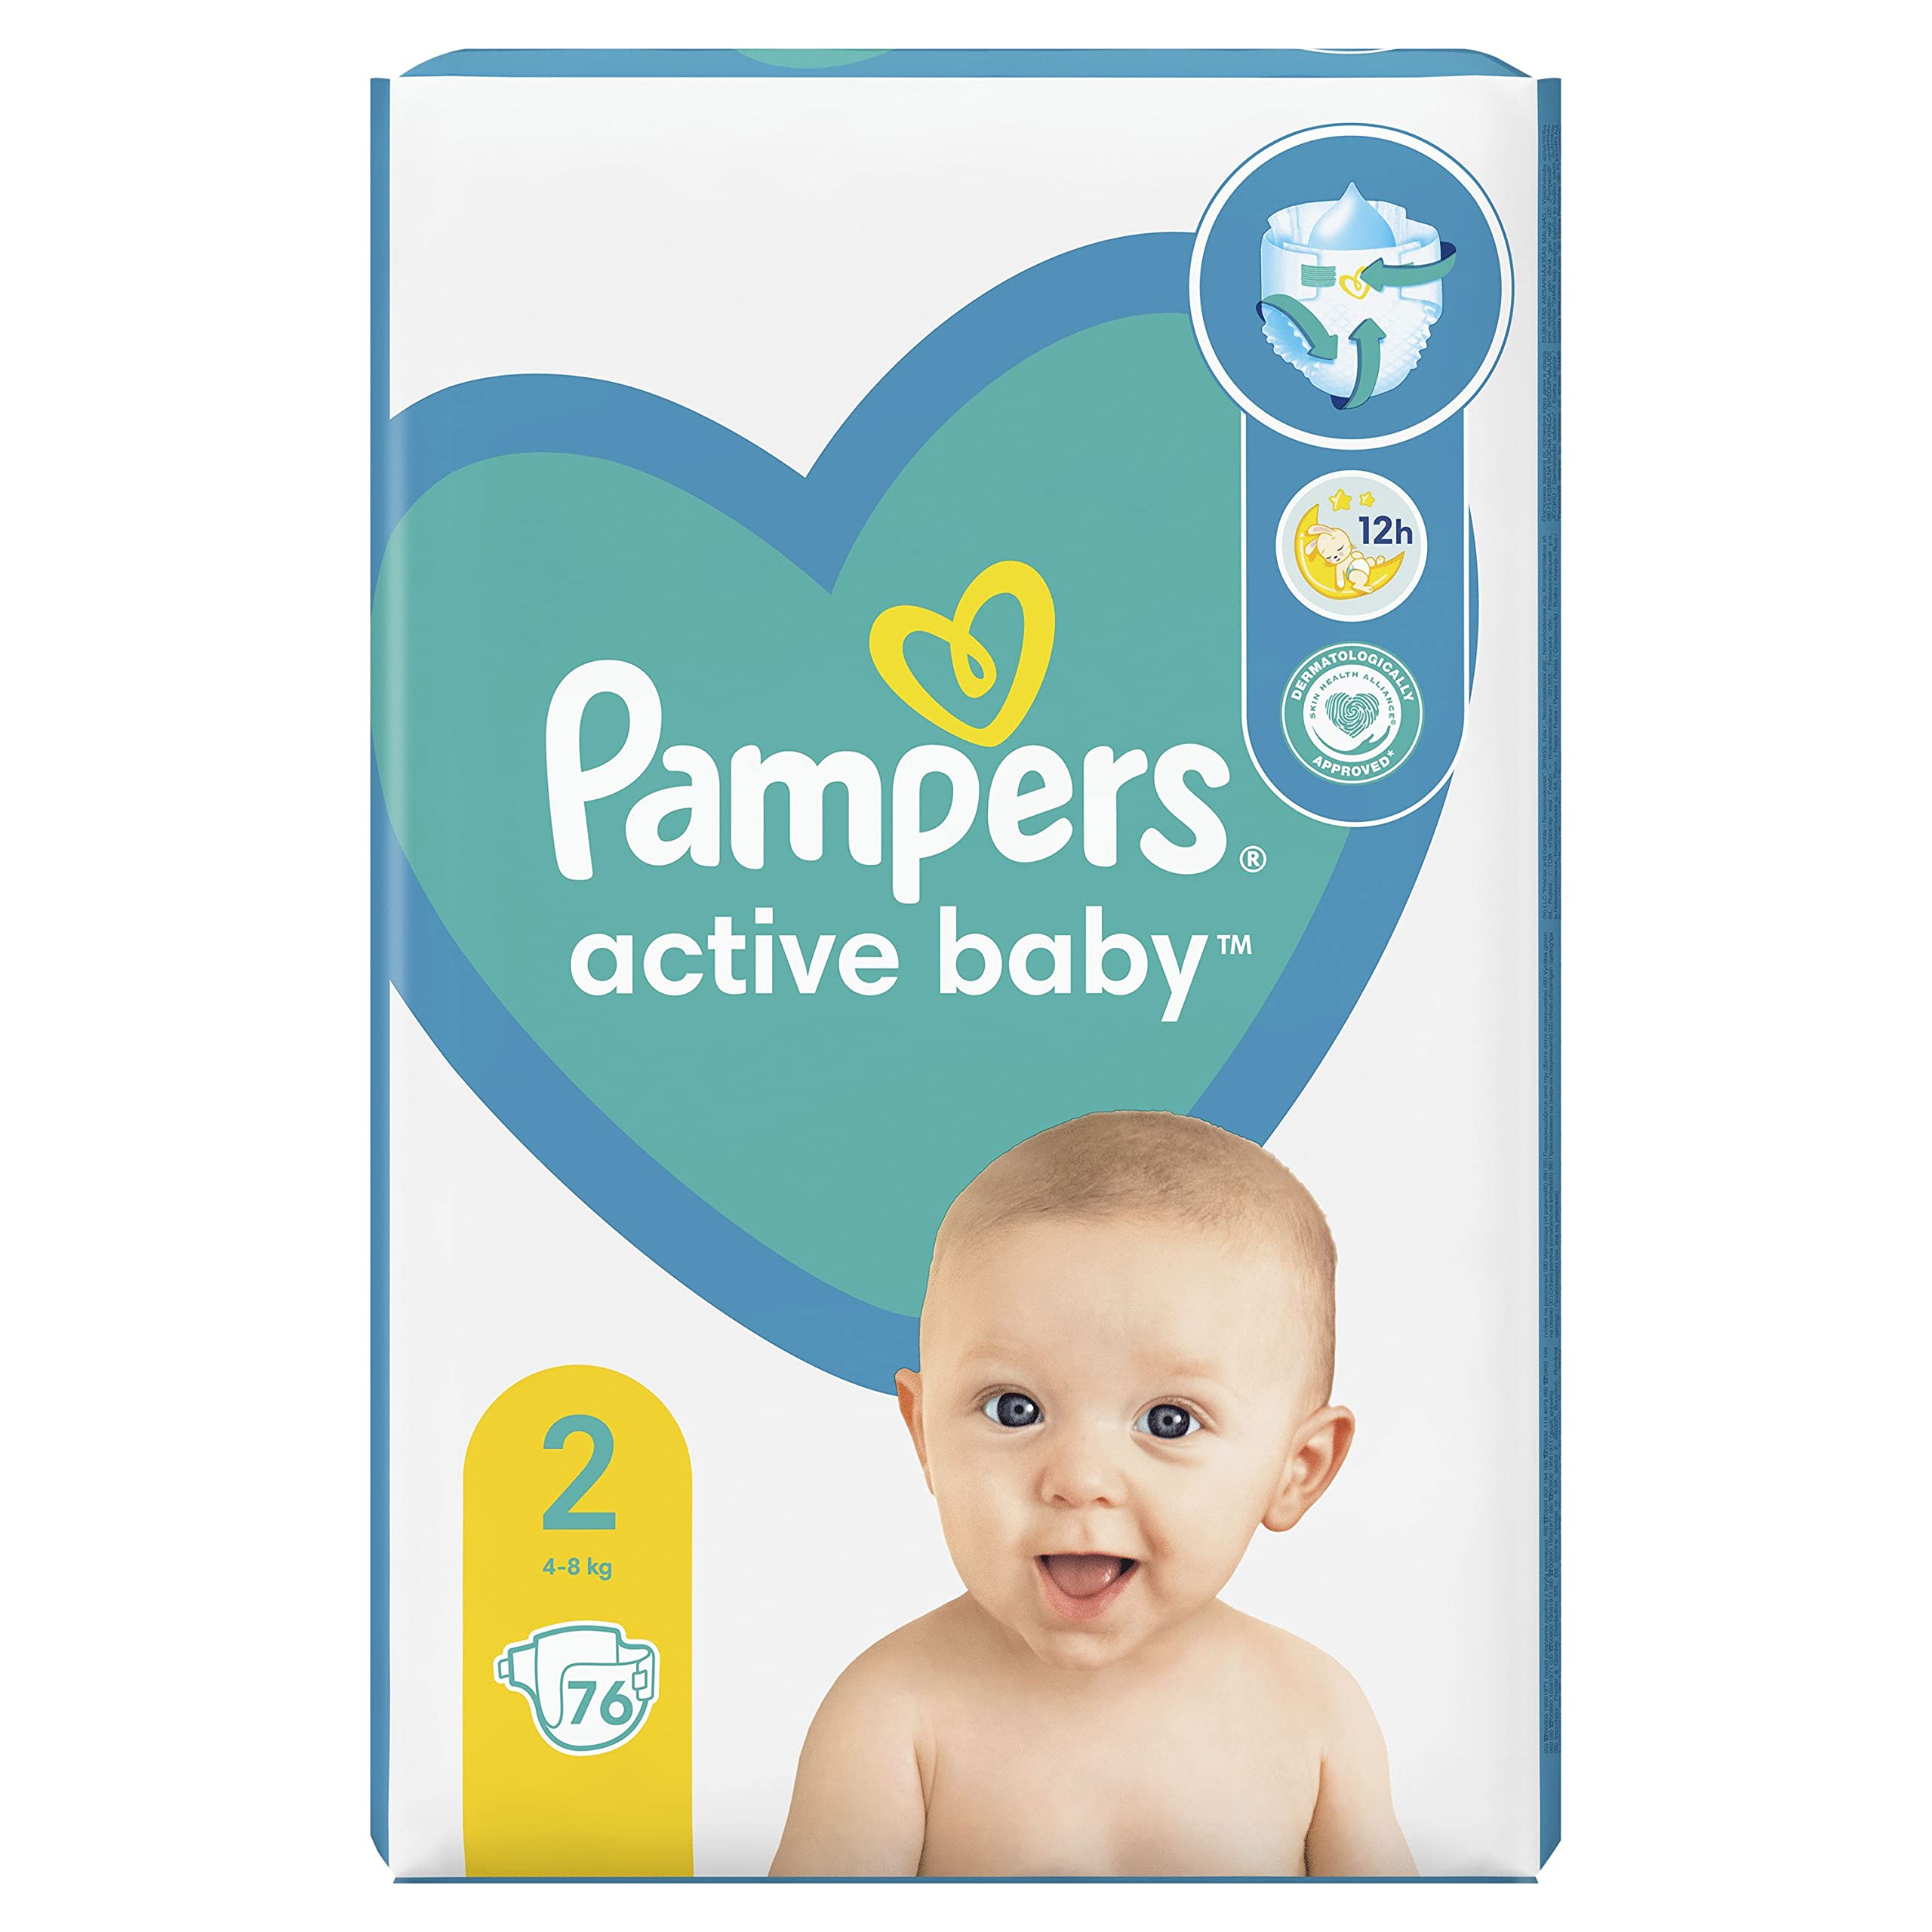 rossmann pampers active baby